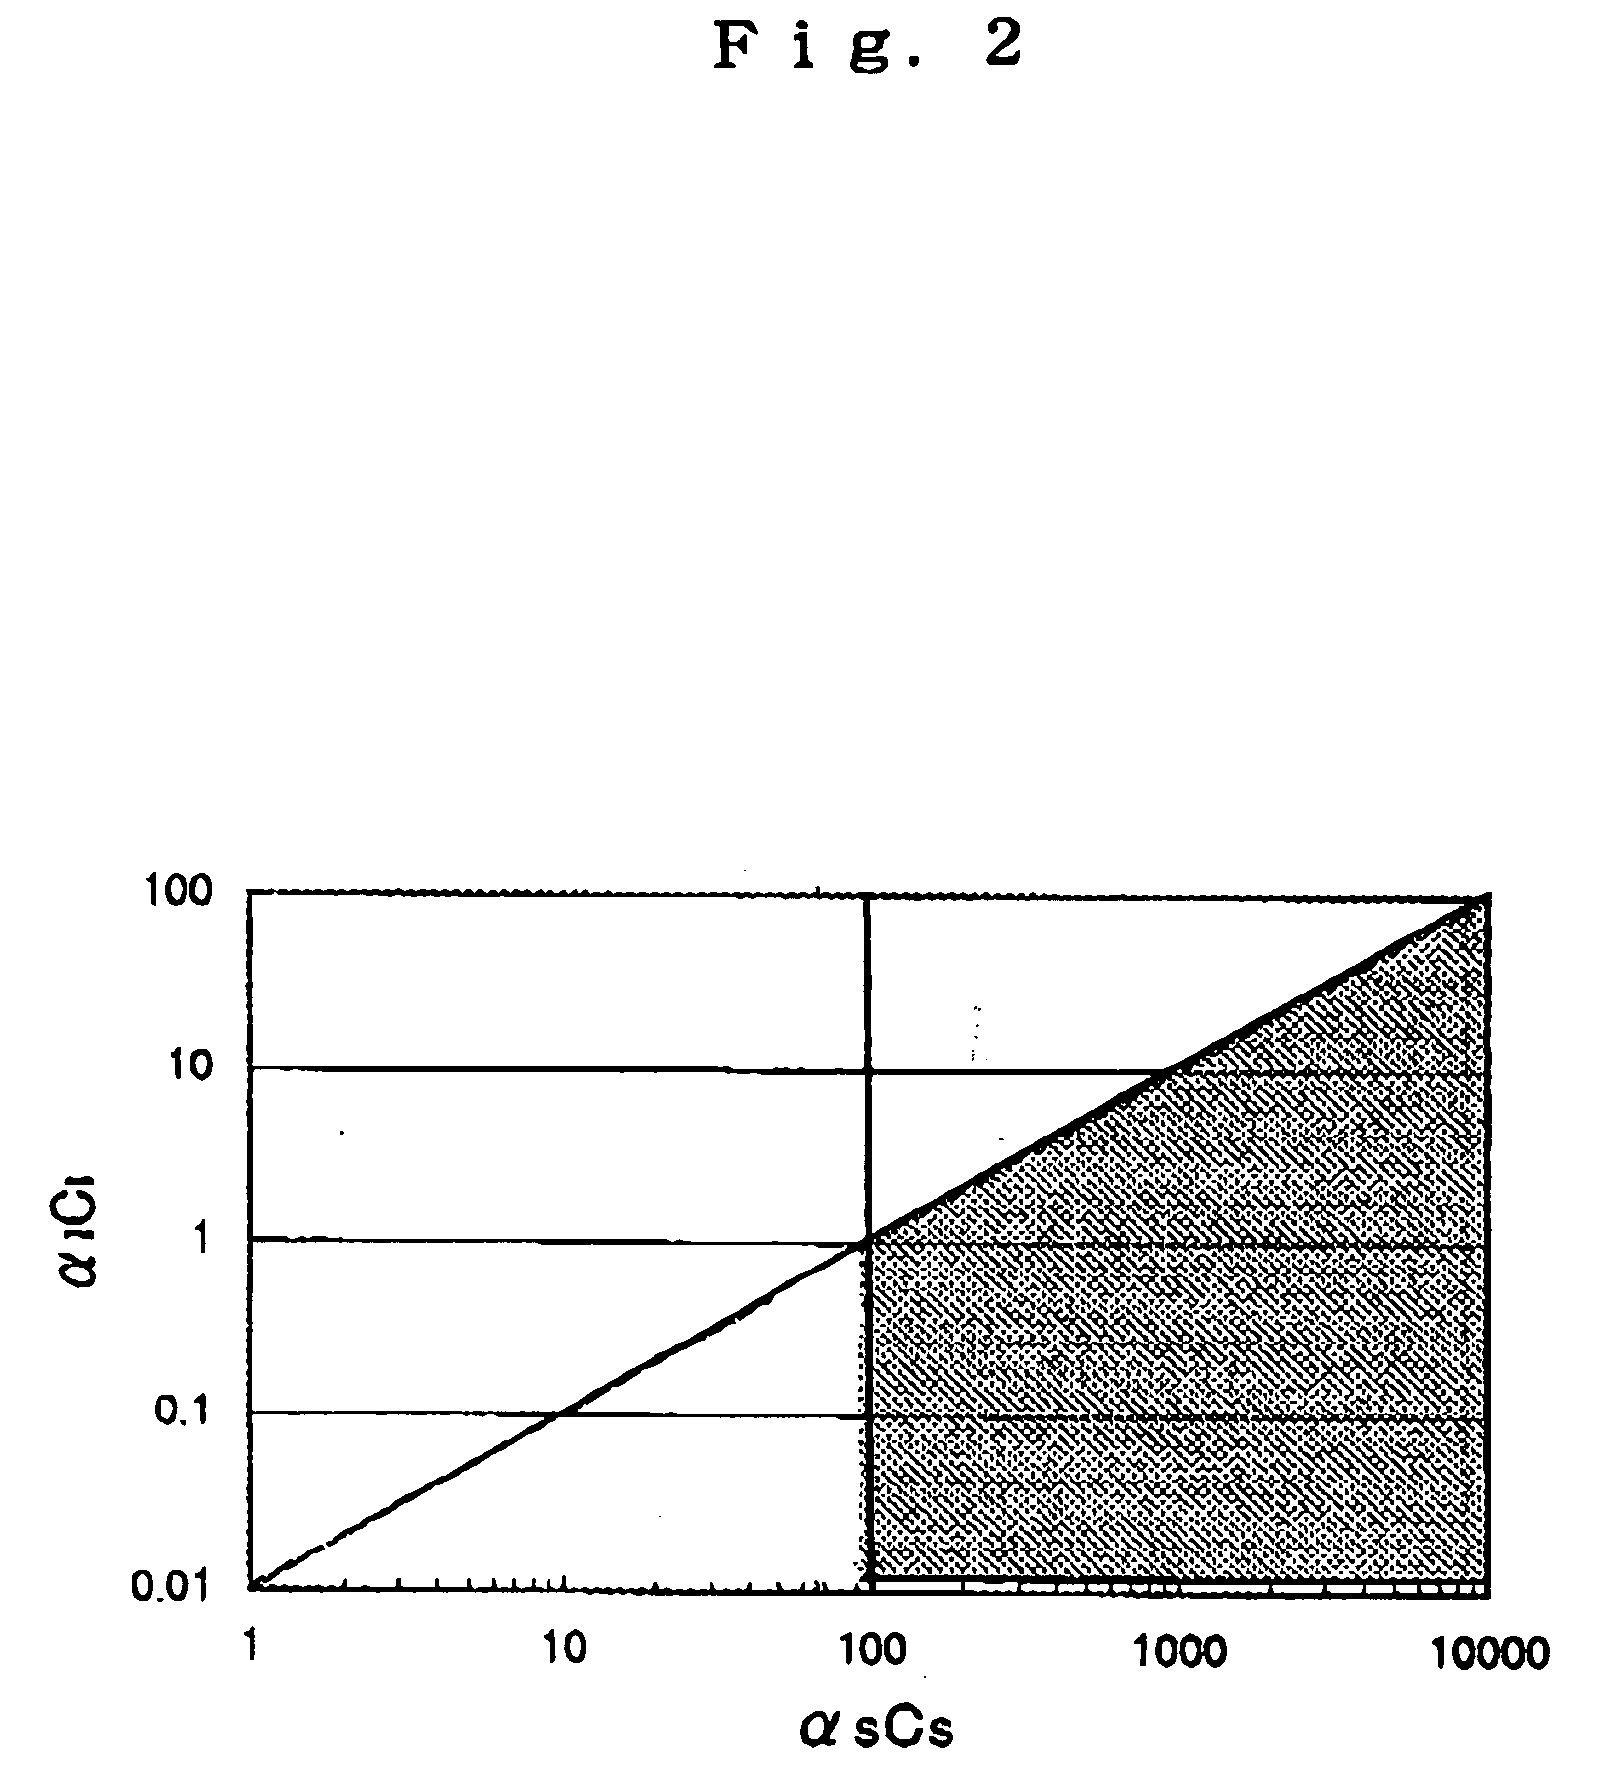 Thermally excited sound wave generating device